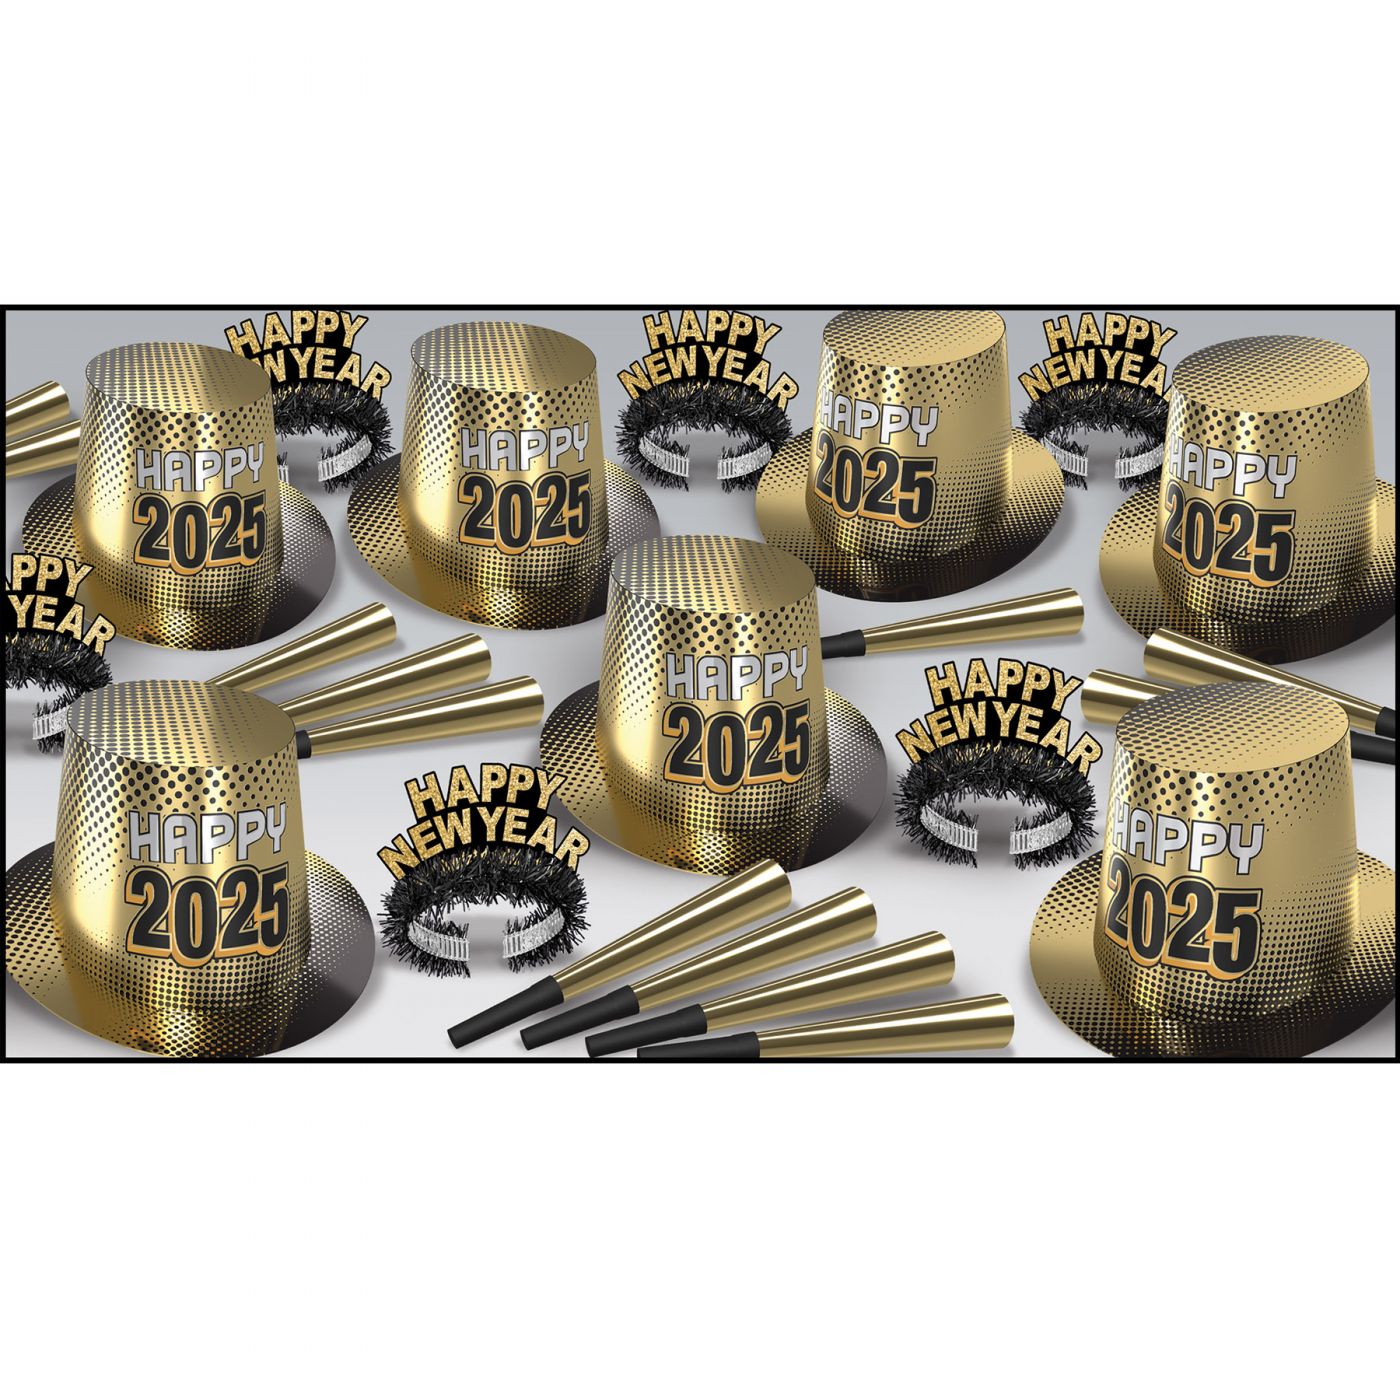 New Year 2025 Gold Assortment for 50 (1) image